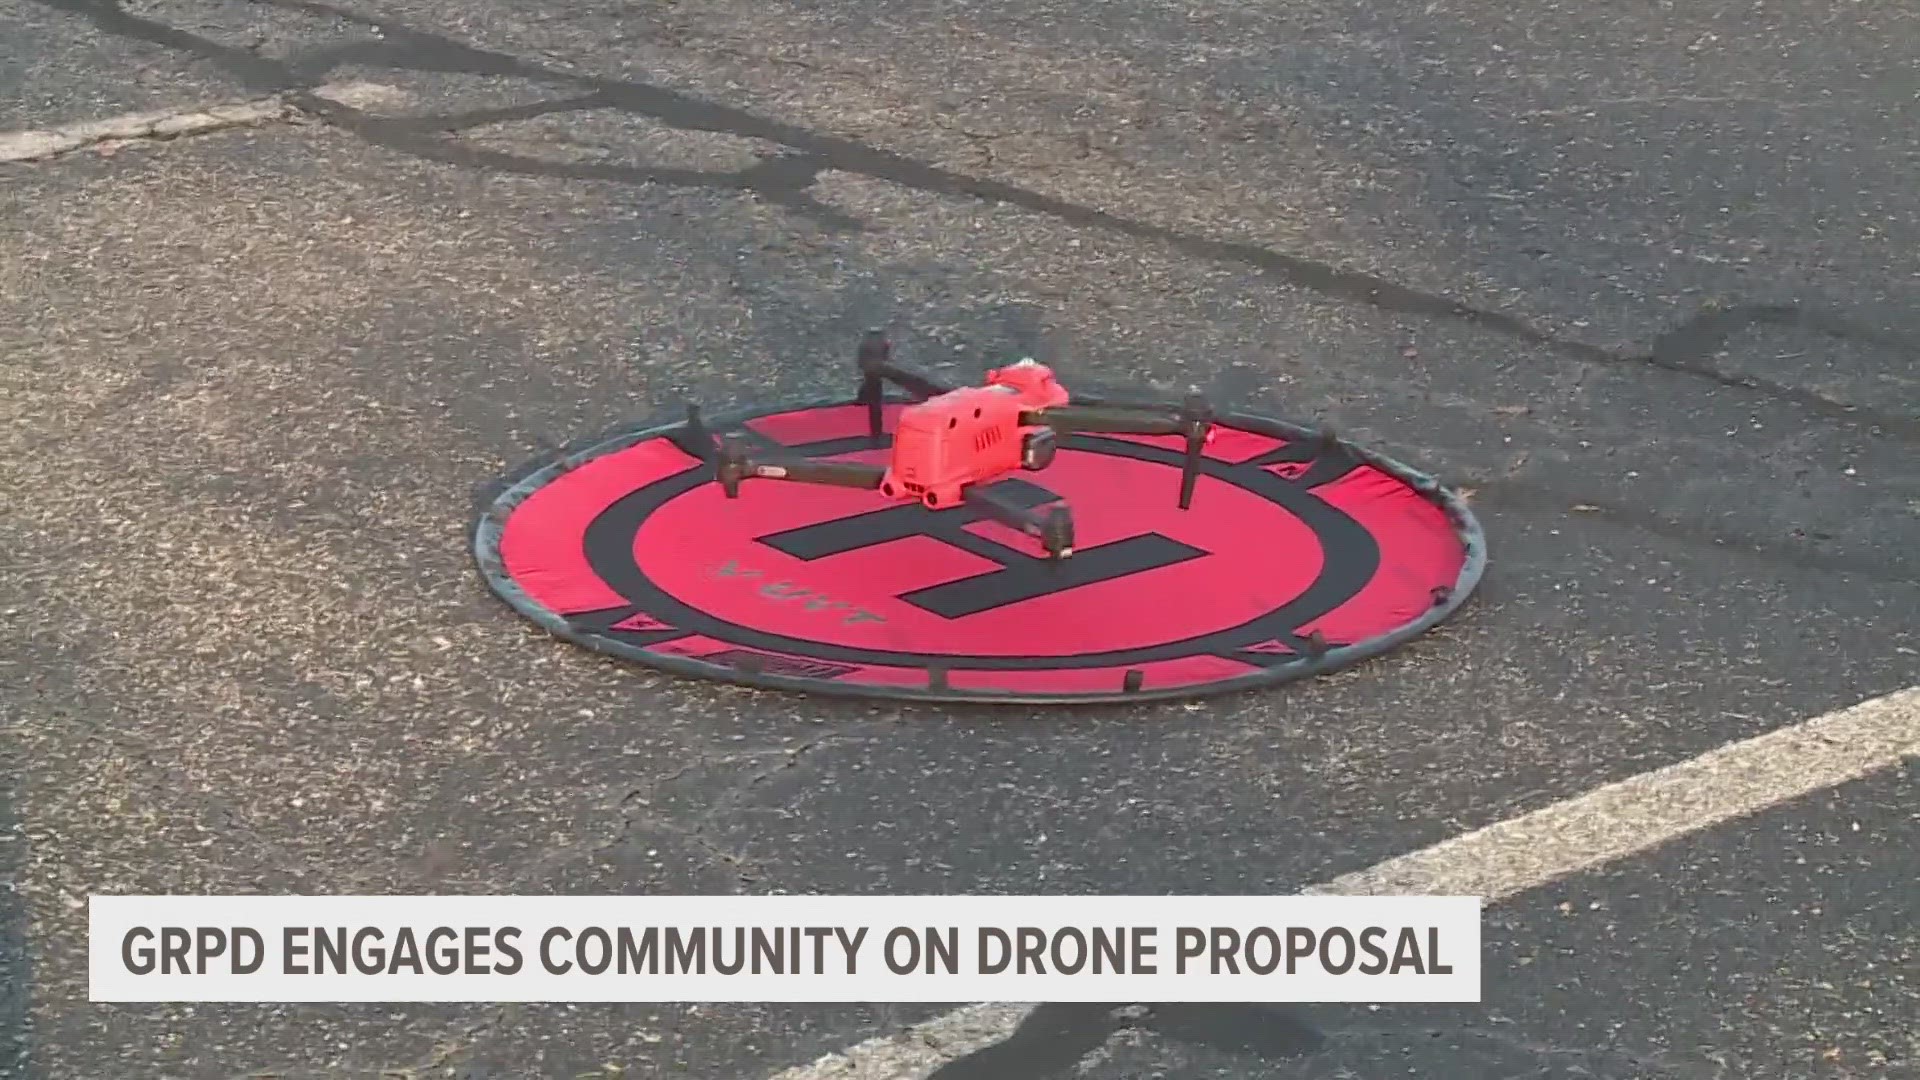 On Tuesday night, the City of Grand Rapids and GRPD held a public forum on the future of drone use if approved and answered questions from community members.